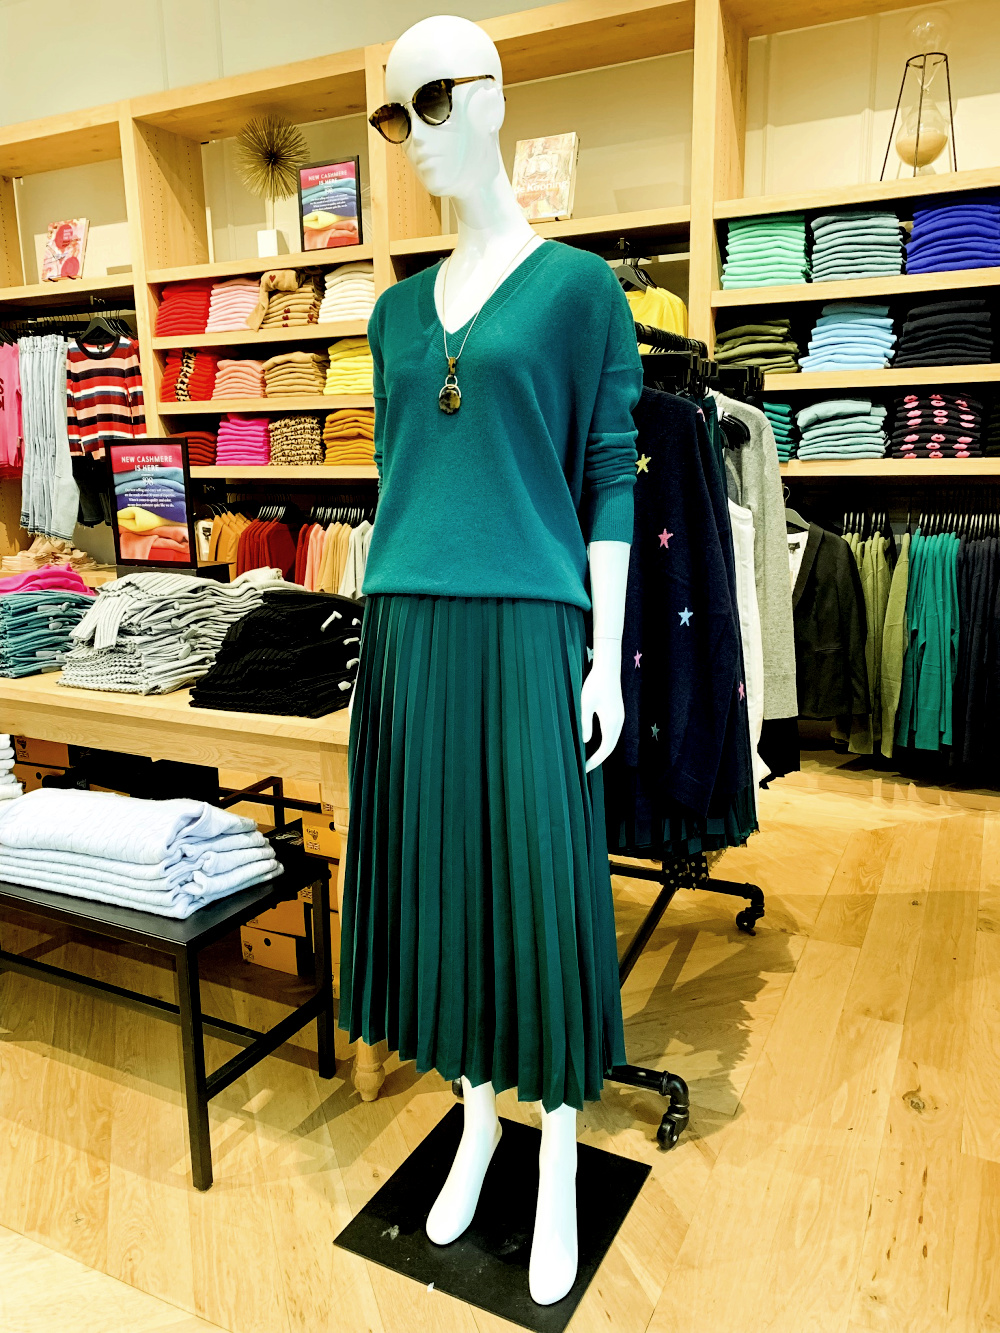 Tonal dressing: Teal green sweater and forest green pleated skirt from J.Crew. Details at une femme d'un certain age.